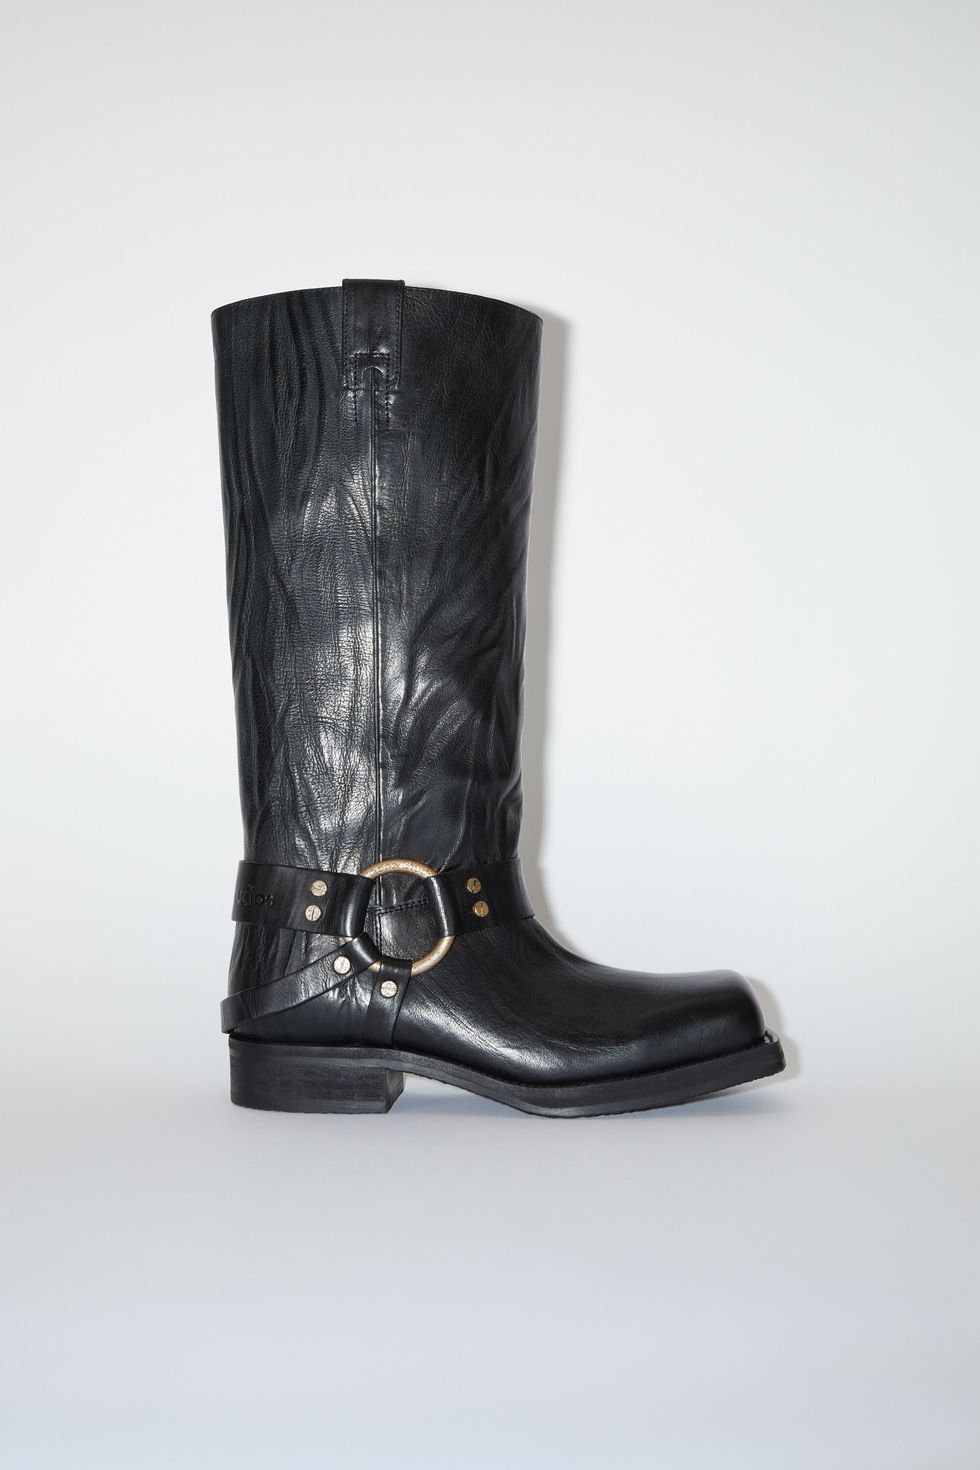 a black boot with a silver buckle